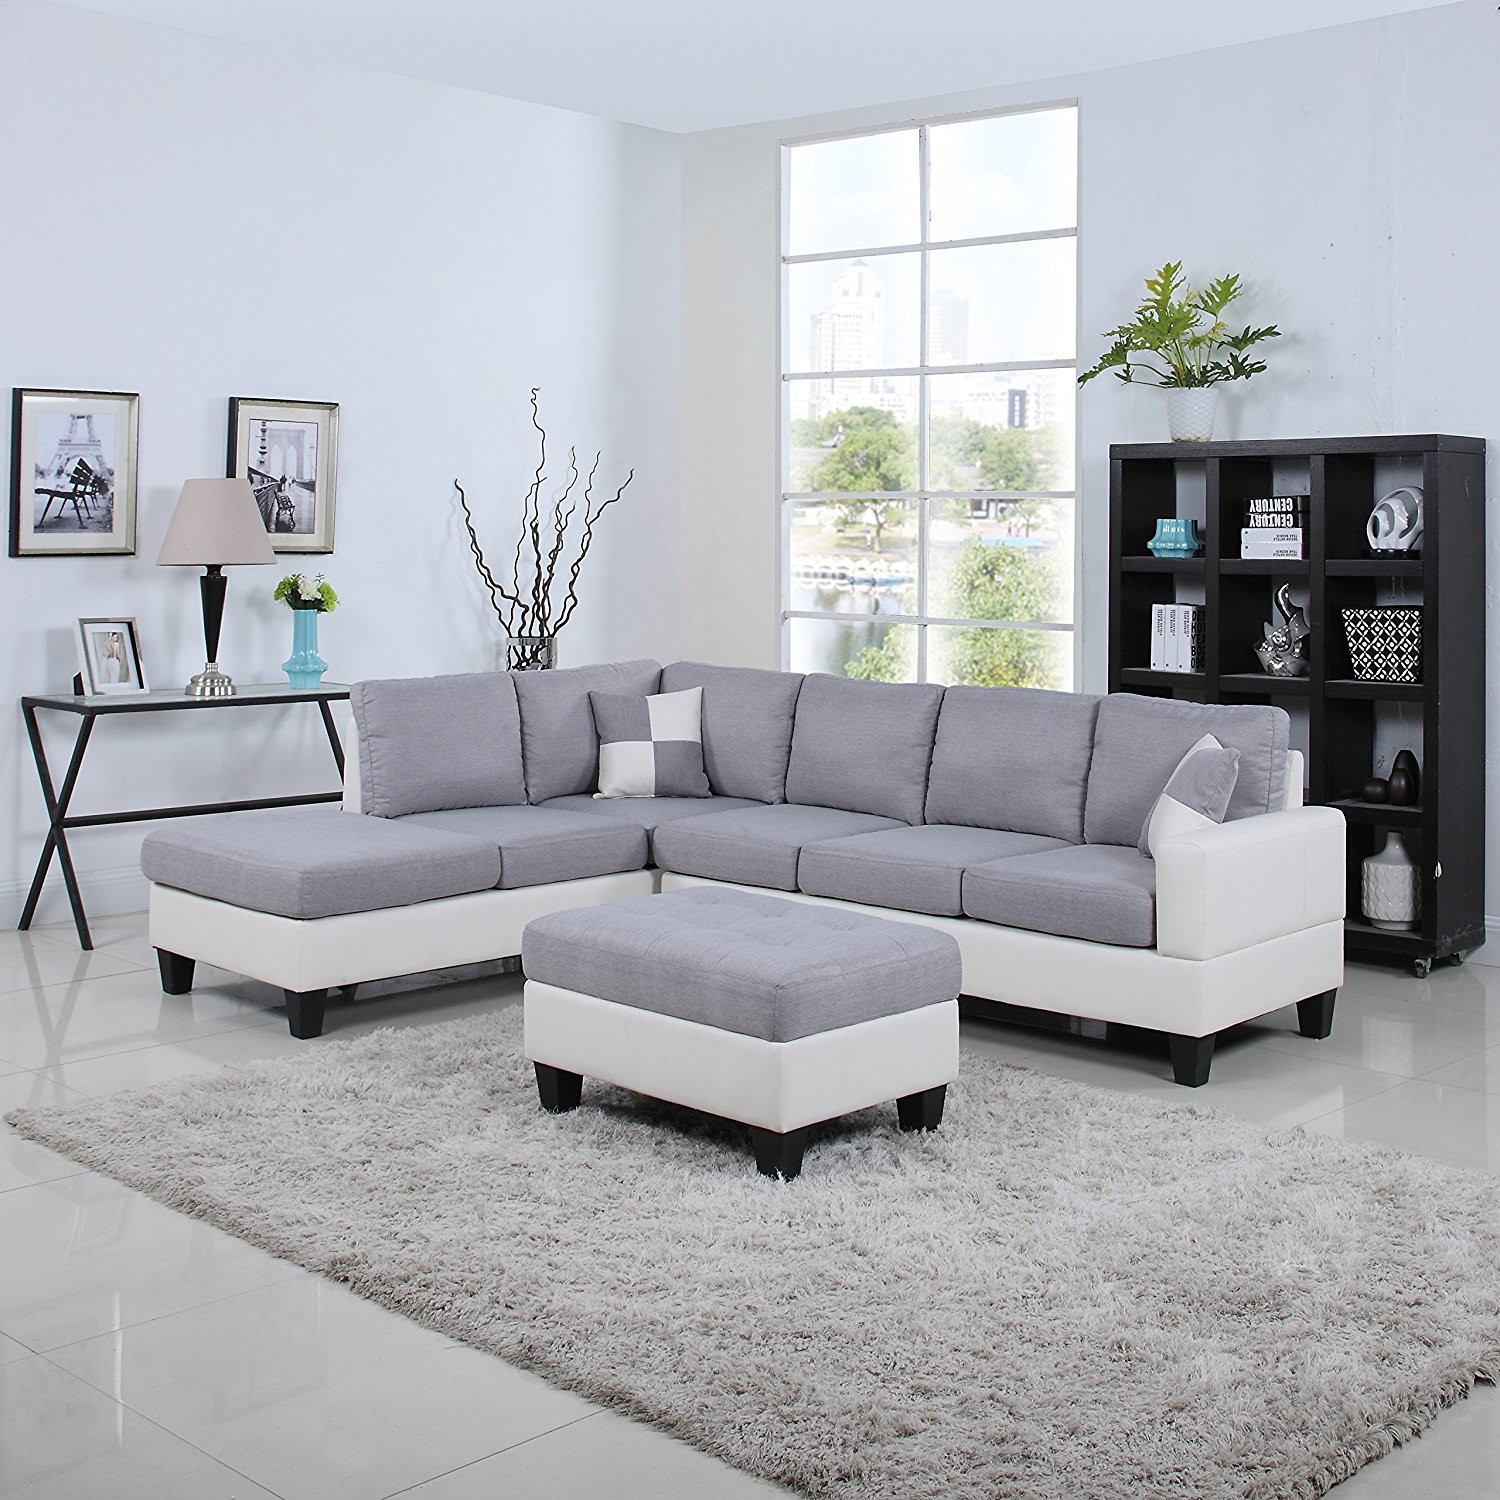 Light Grey Couch Living Room
 Living Room Sectionals Furniture For Your House